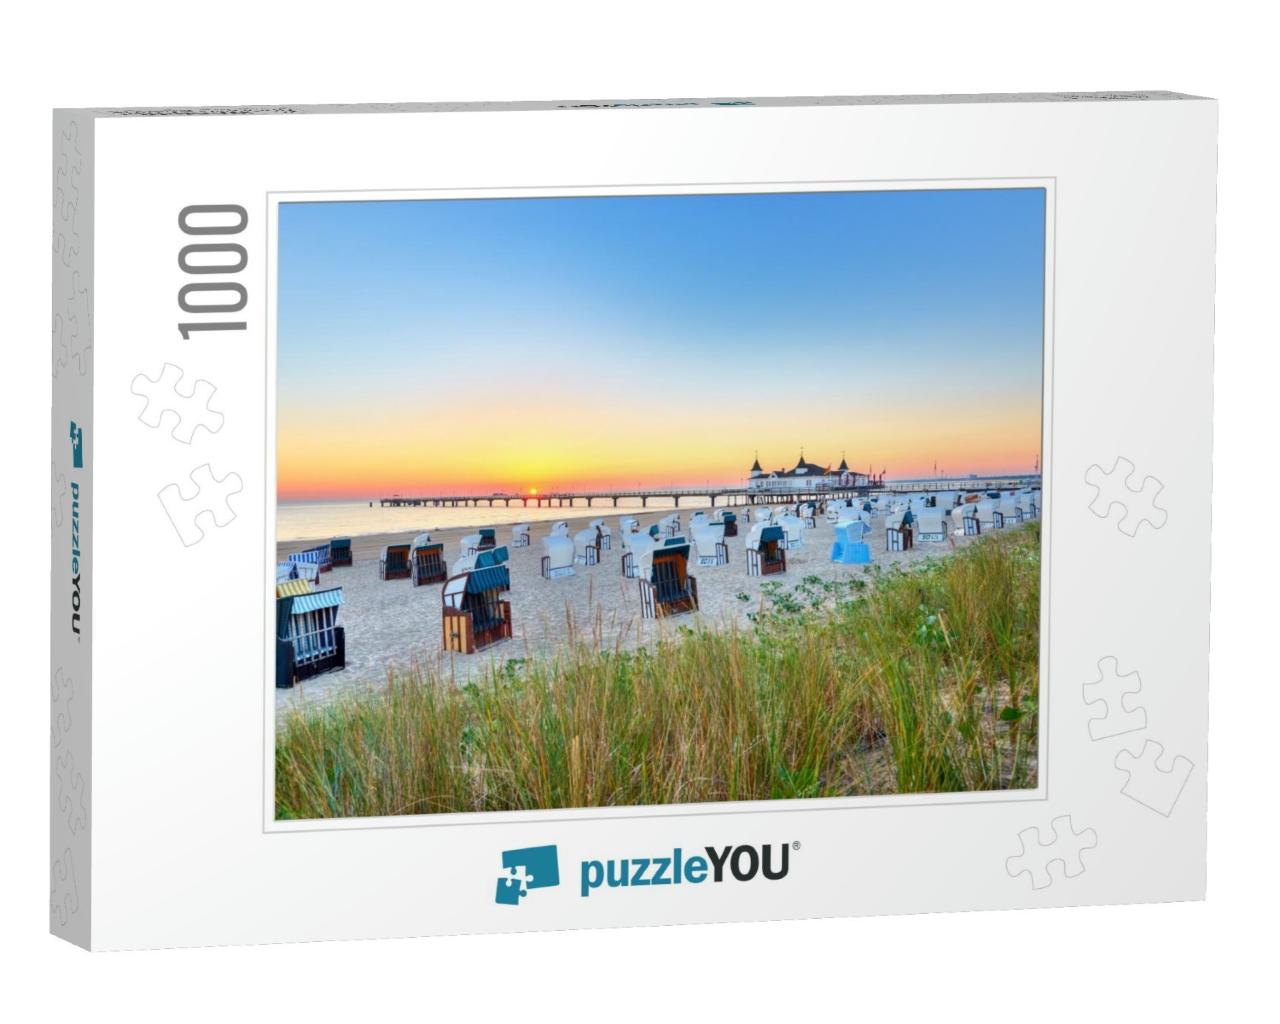 Morning Time At Baltic Sea Beach & Sight Ahlbeck Pier in... Jigsaw Puzzle with 1000 pieces